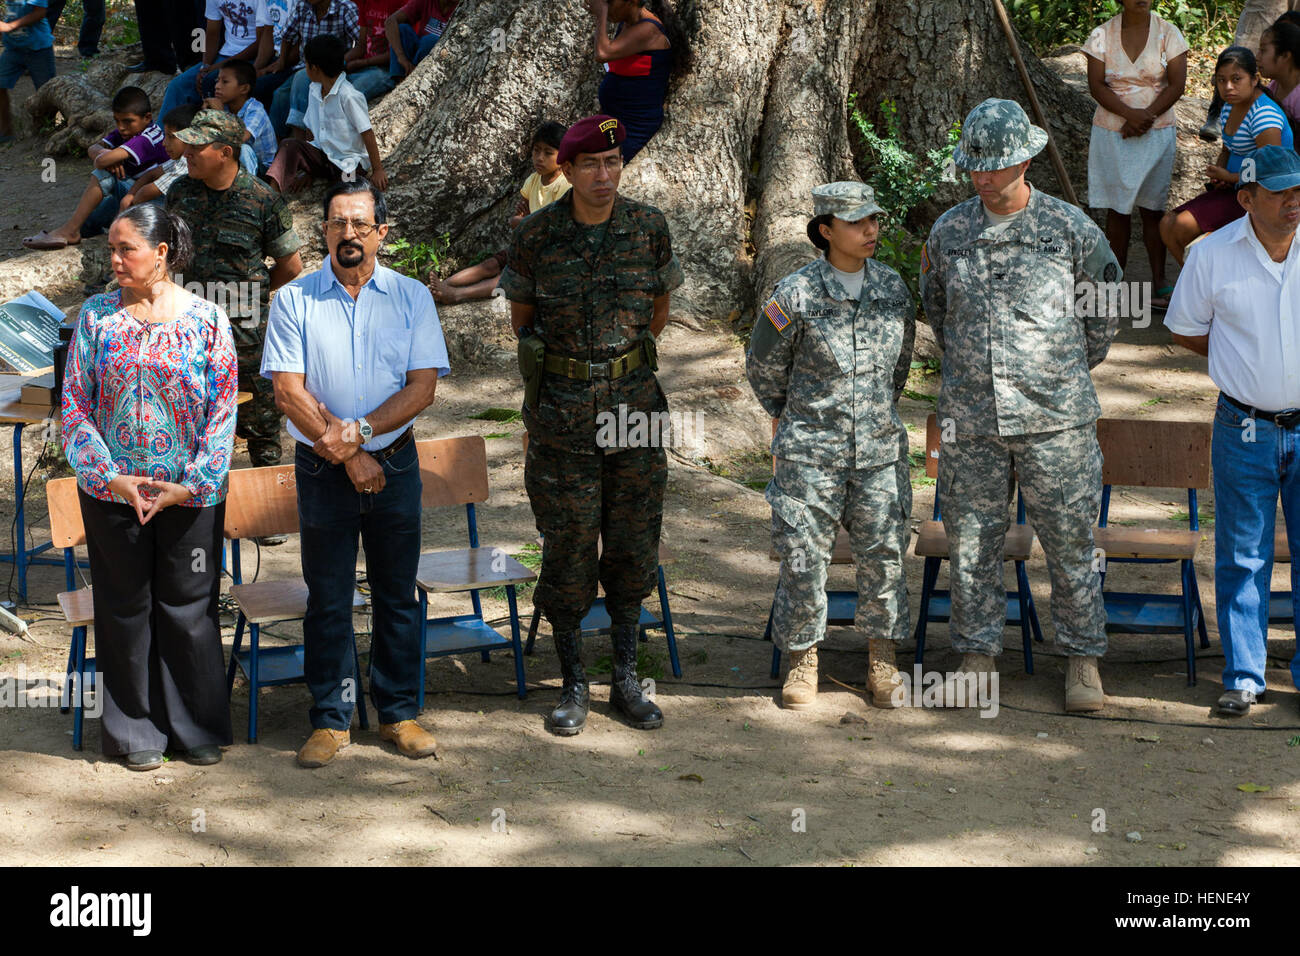 Distinguished guests await the start of an opening ceremony as U.S. Army and Guatemalan Soldiers break ground to construct a new school during Beyond the Horizon 2014, Zacapa, Guatemala, Apr. 9, 2014. Beyond the Horizon is an annual exercise that embraces the partnership between the United States and Guatemala, to provide focused humanitarian assistance through various medical, dental, and civic action programs. (U.S. Army photo by Staff Sgt. Justin P. Morelli) (Not Released) Beyond the Horizon 2014 140409-A-PP104-023 Stock Photo